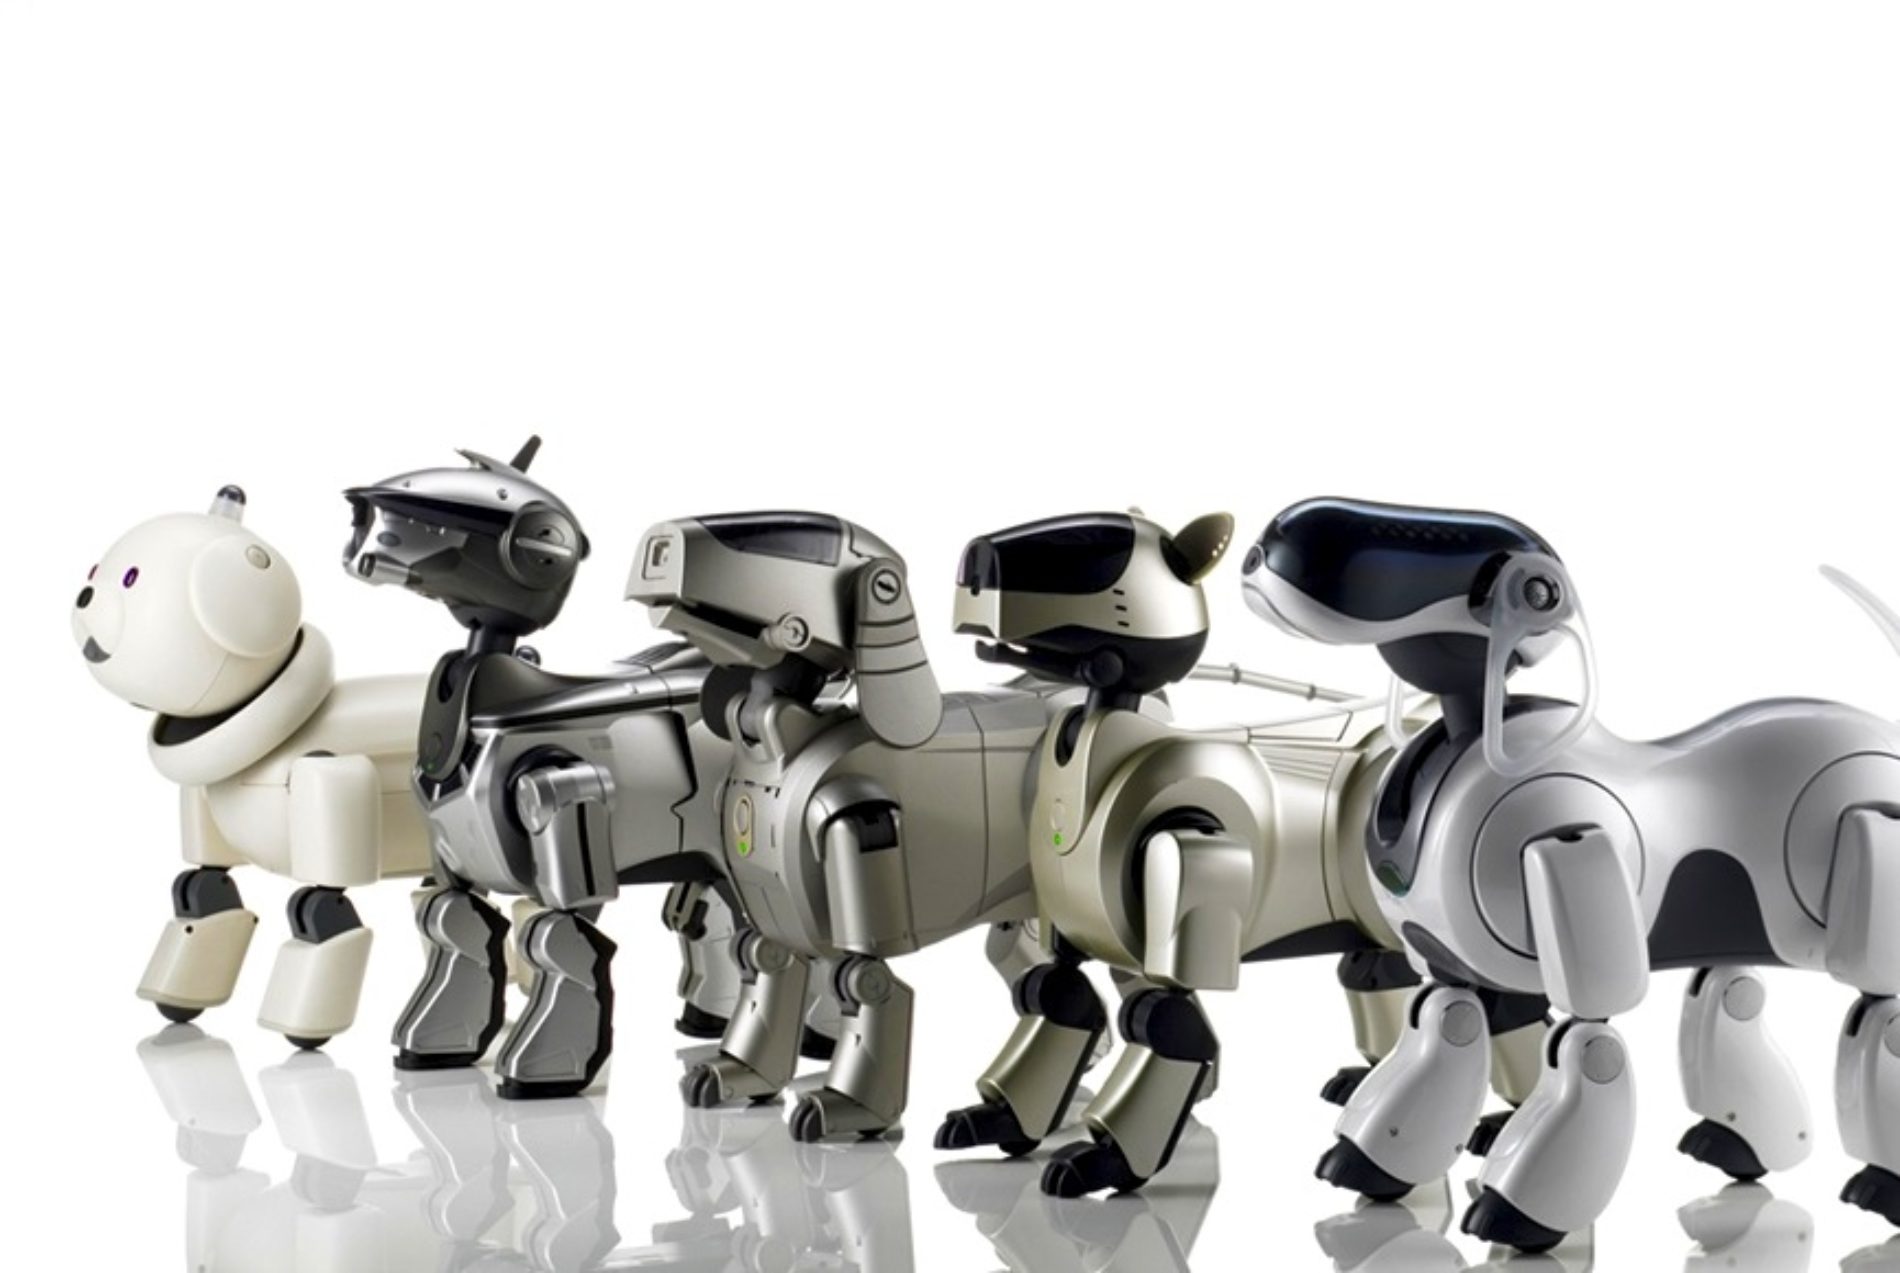 Sony Halts Support for Aibo, Still One of the Best Robot Toys Ever